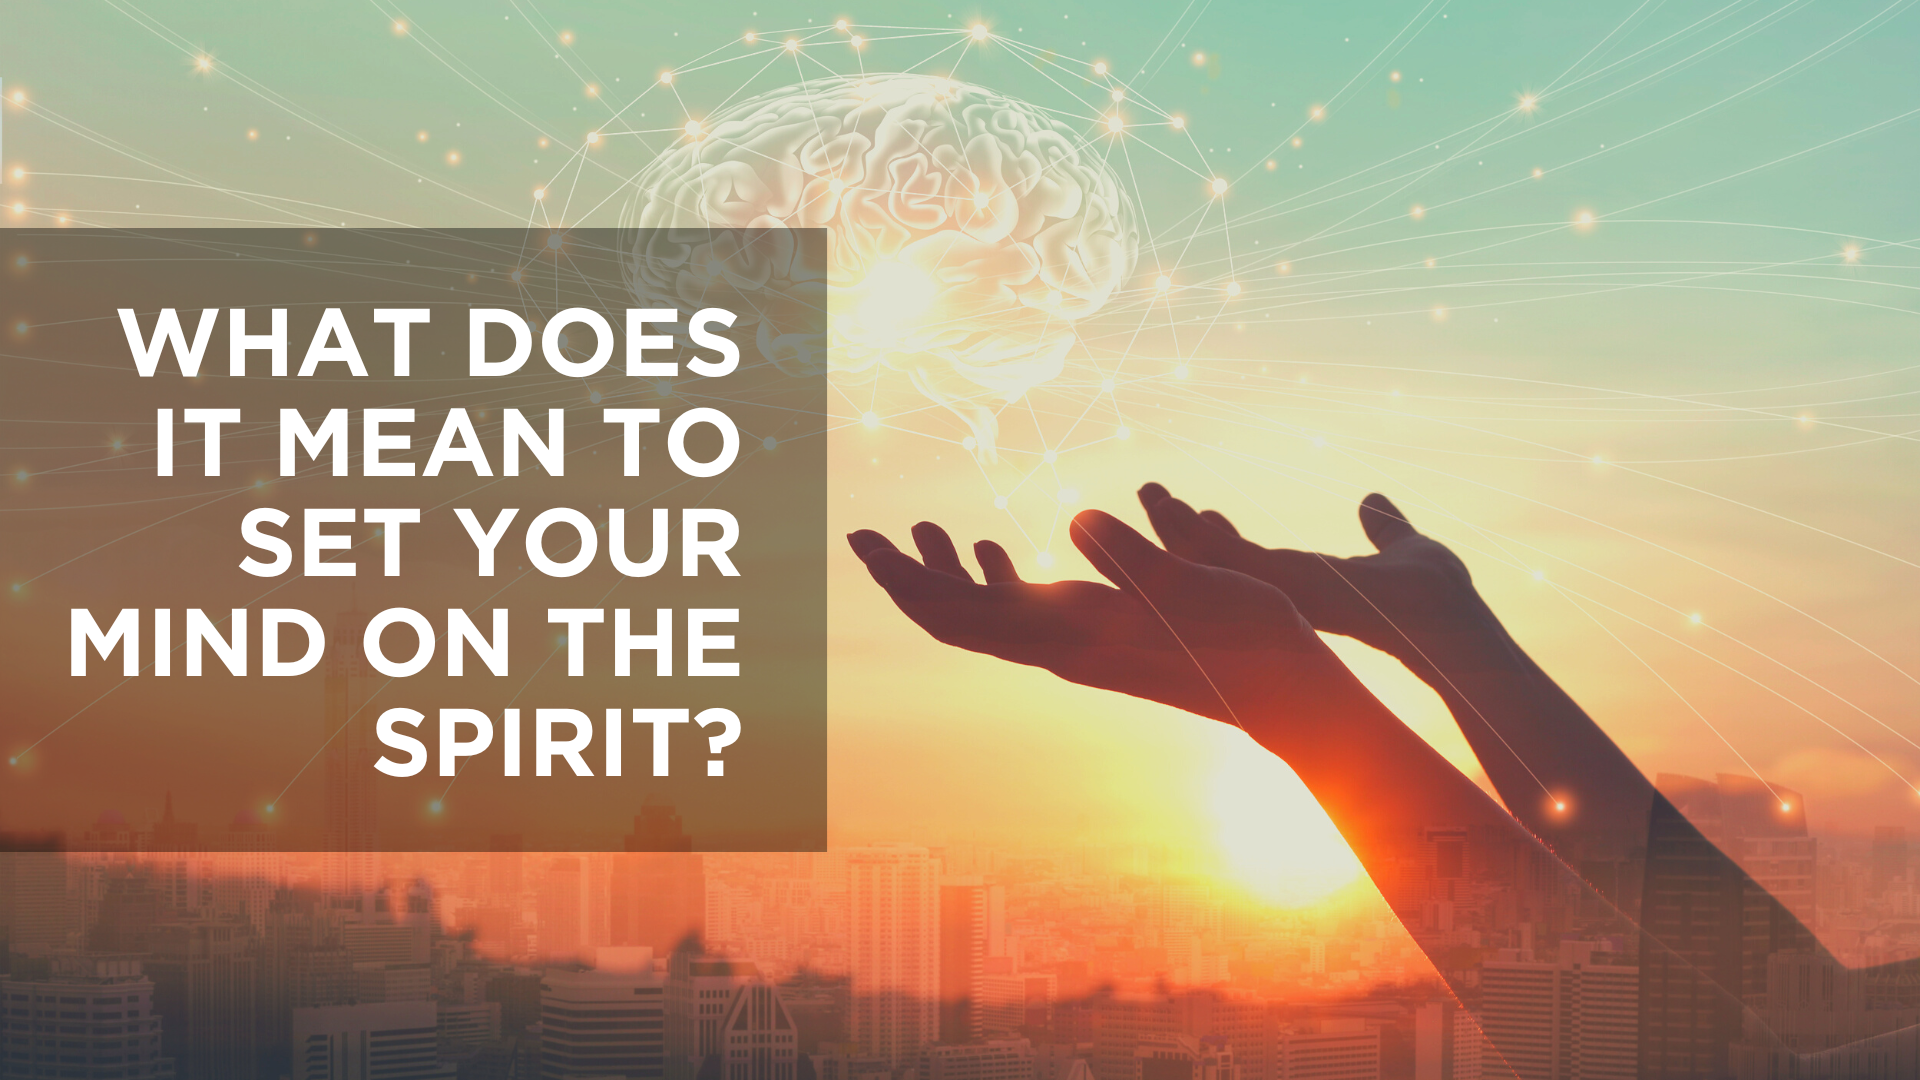 What Does It Mean to Set Your Mind on the Spirit?